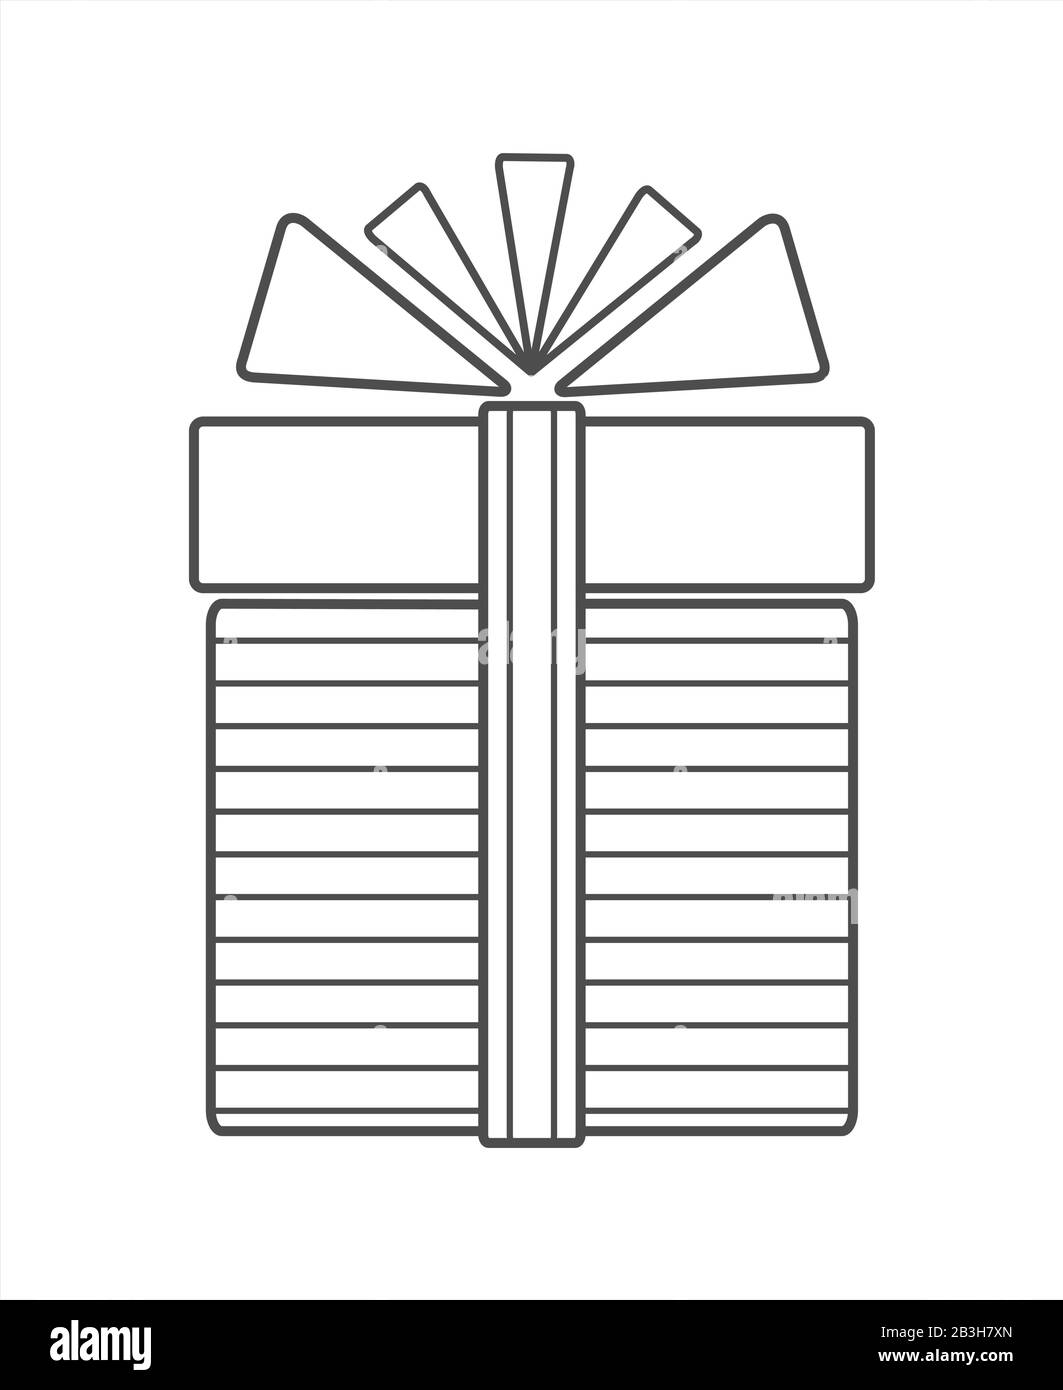 Gift Box With Ribbon And Bow, Icon. Gift For Christmas, New Year, Birthday, Holiday. Contour Vector Illustration, Outline. For Coloring Book Page. Stock Vector